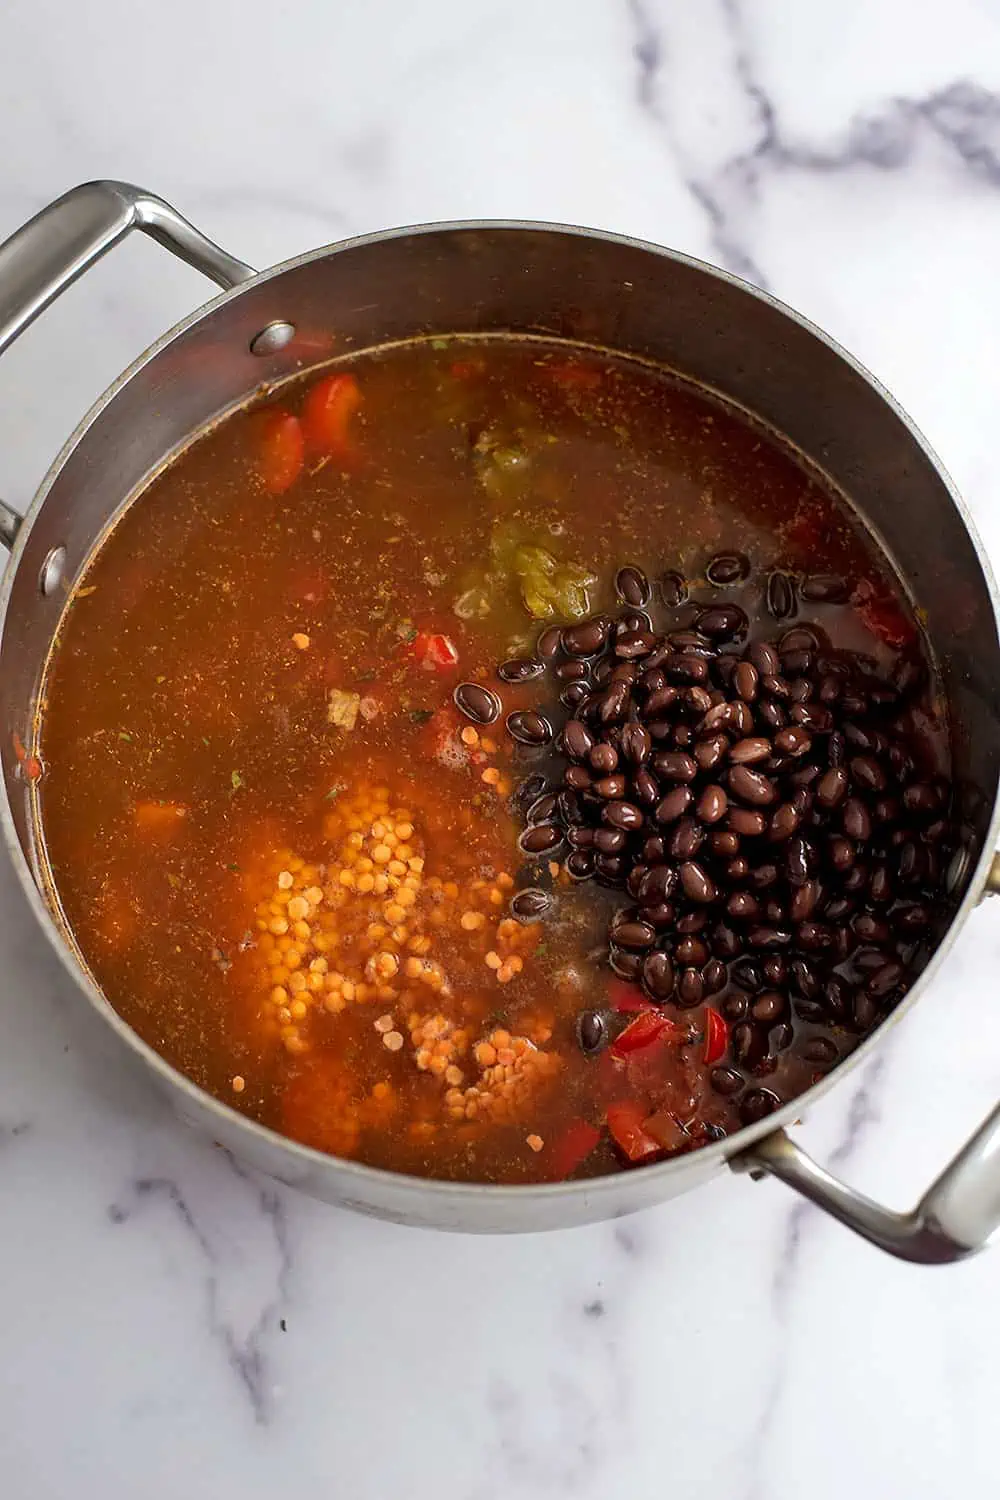 Black beans, lentils and vegetable broth added to pot.